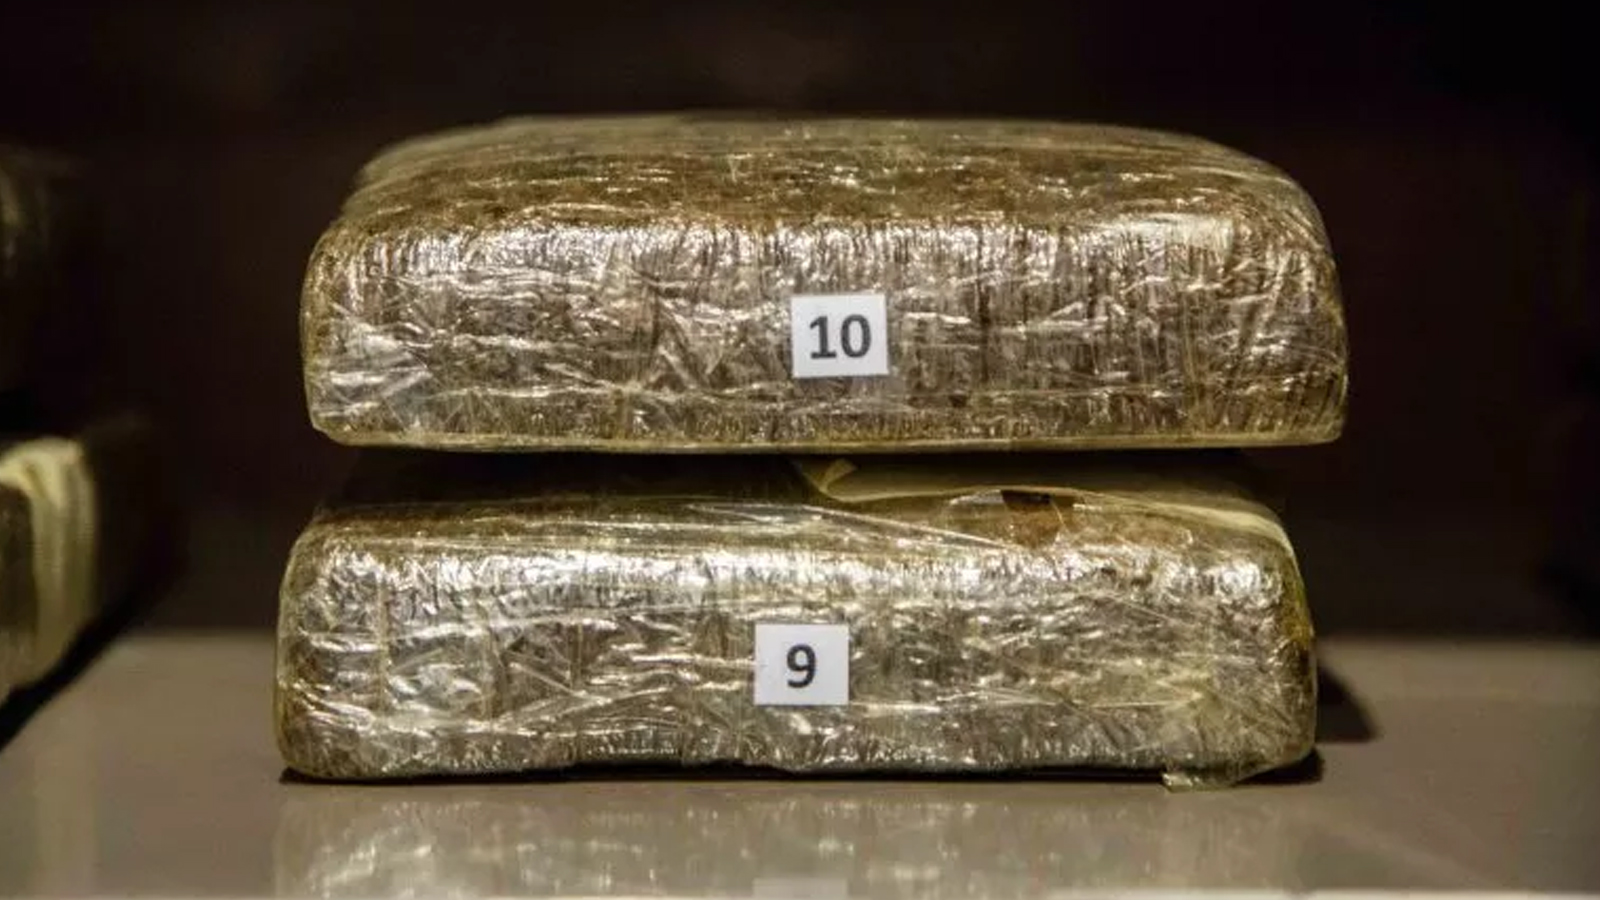 Montana Drug Couriers Busted in Minnesota With 900 Pounds of Pot Go Free